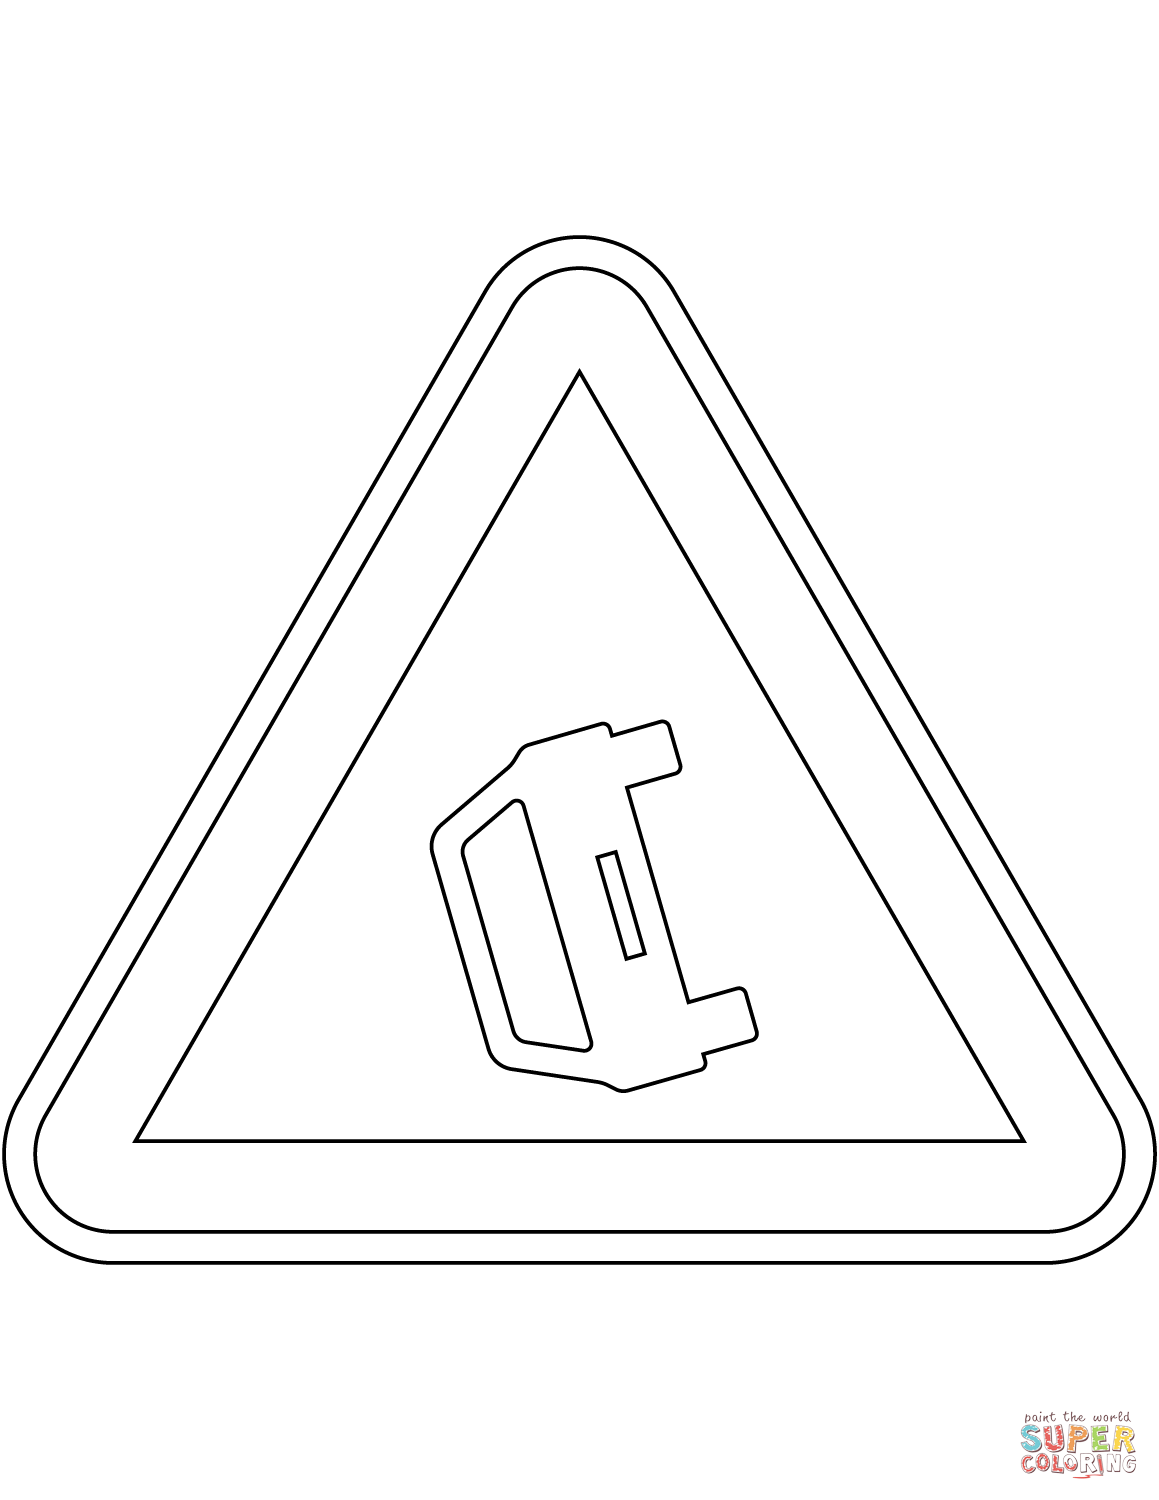 Accident area sign in portugal coloring page free printable coloring pages